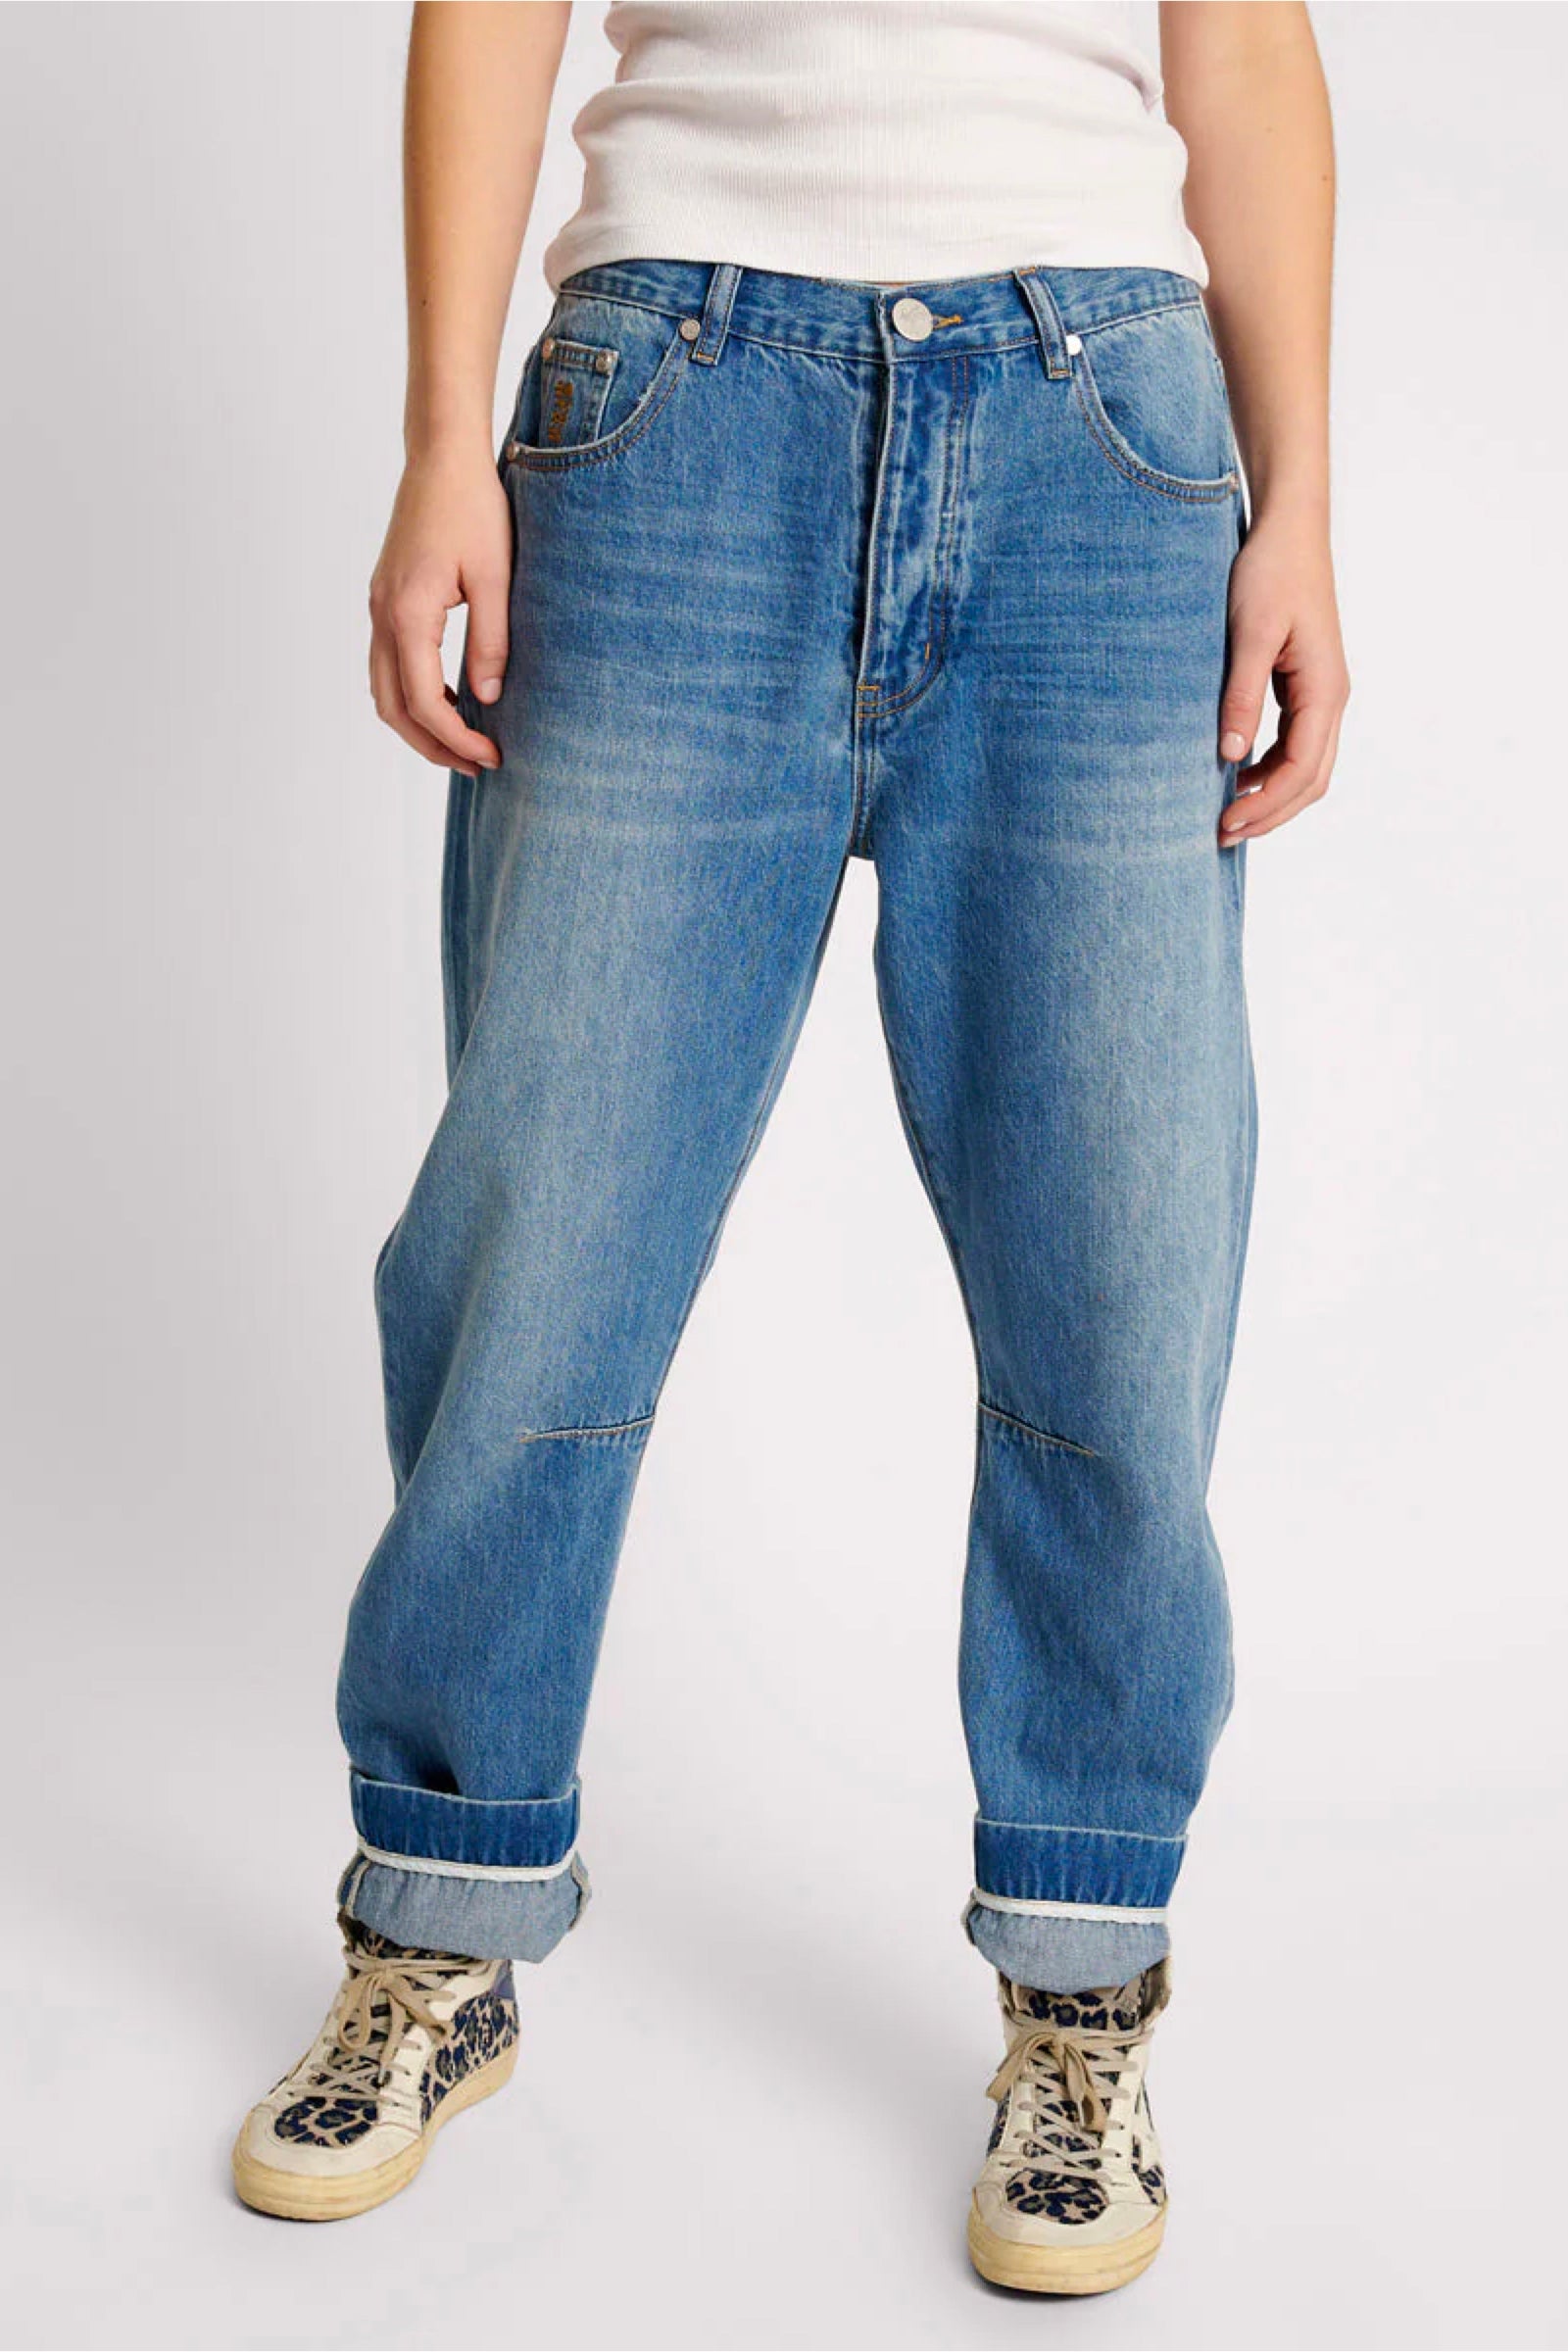 PACIFICA BANDIT RELAXED FIT DENIM JEAN - PACIFICA